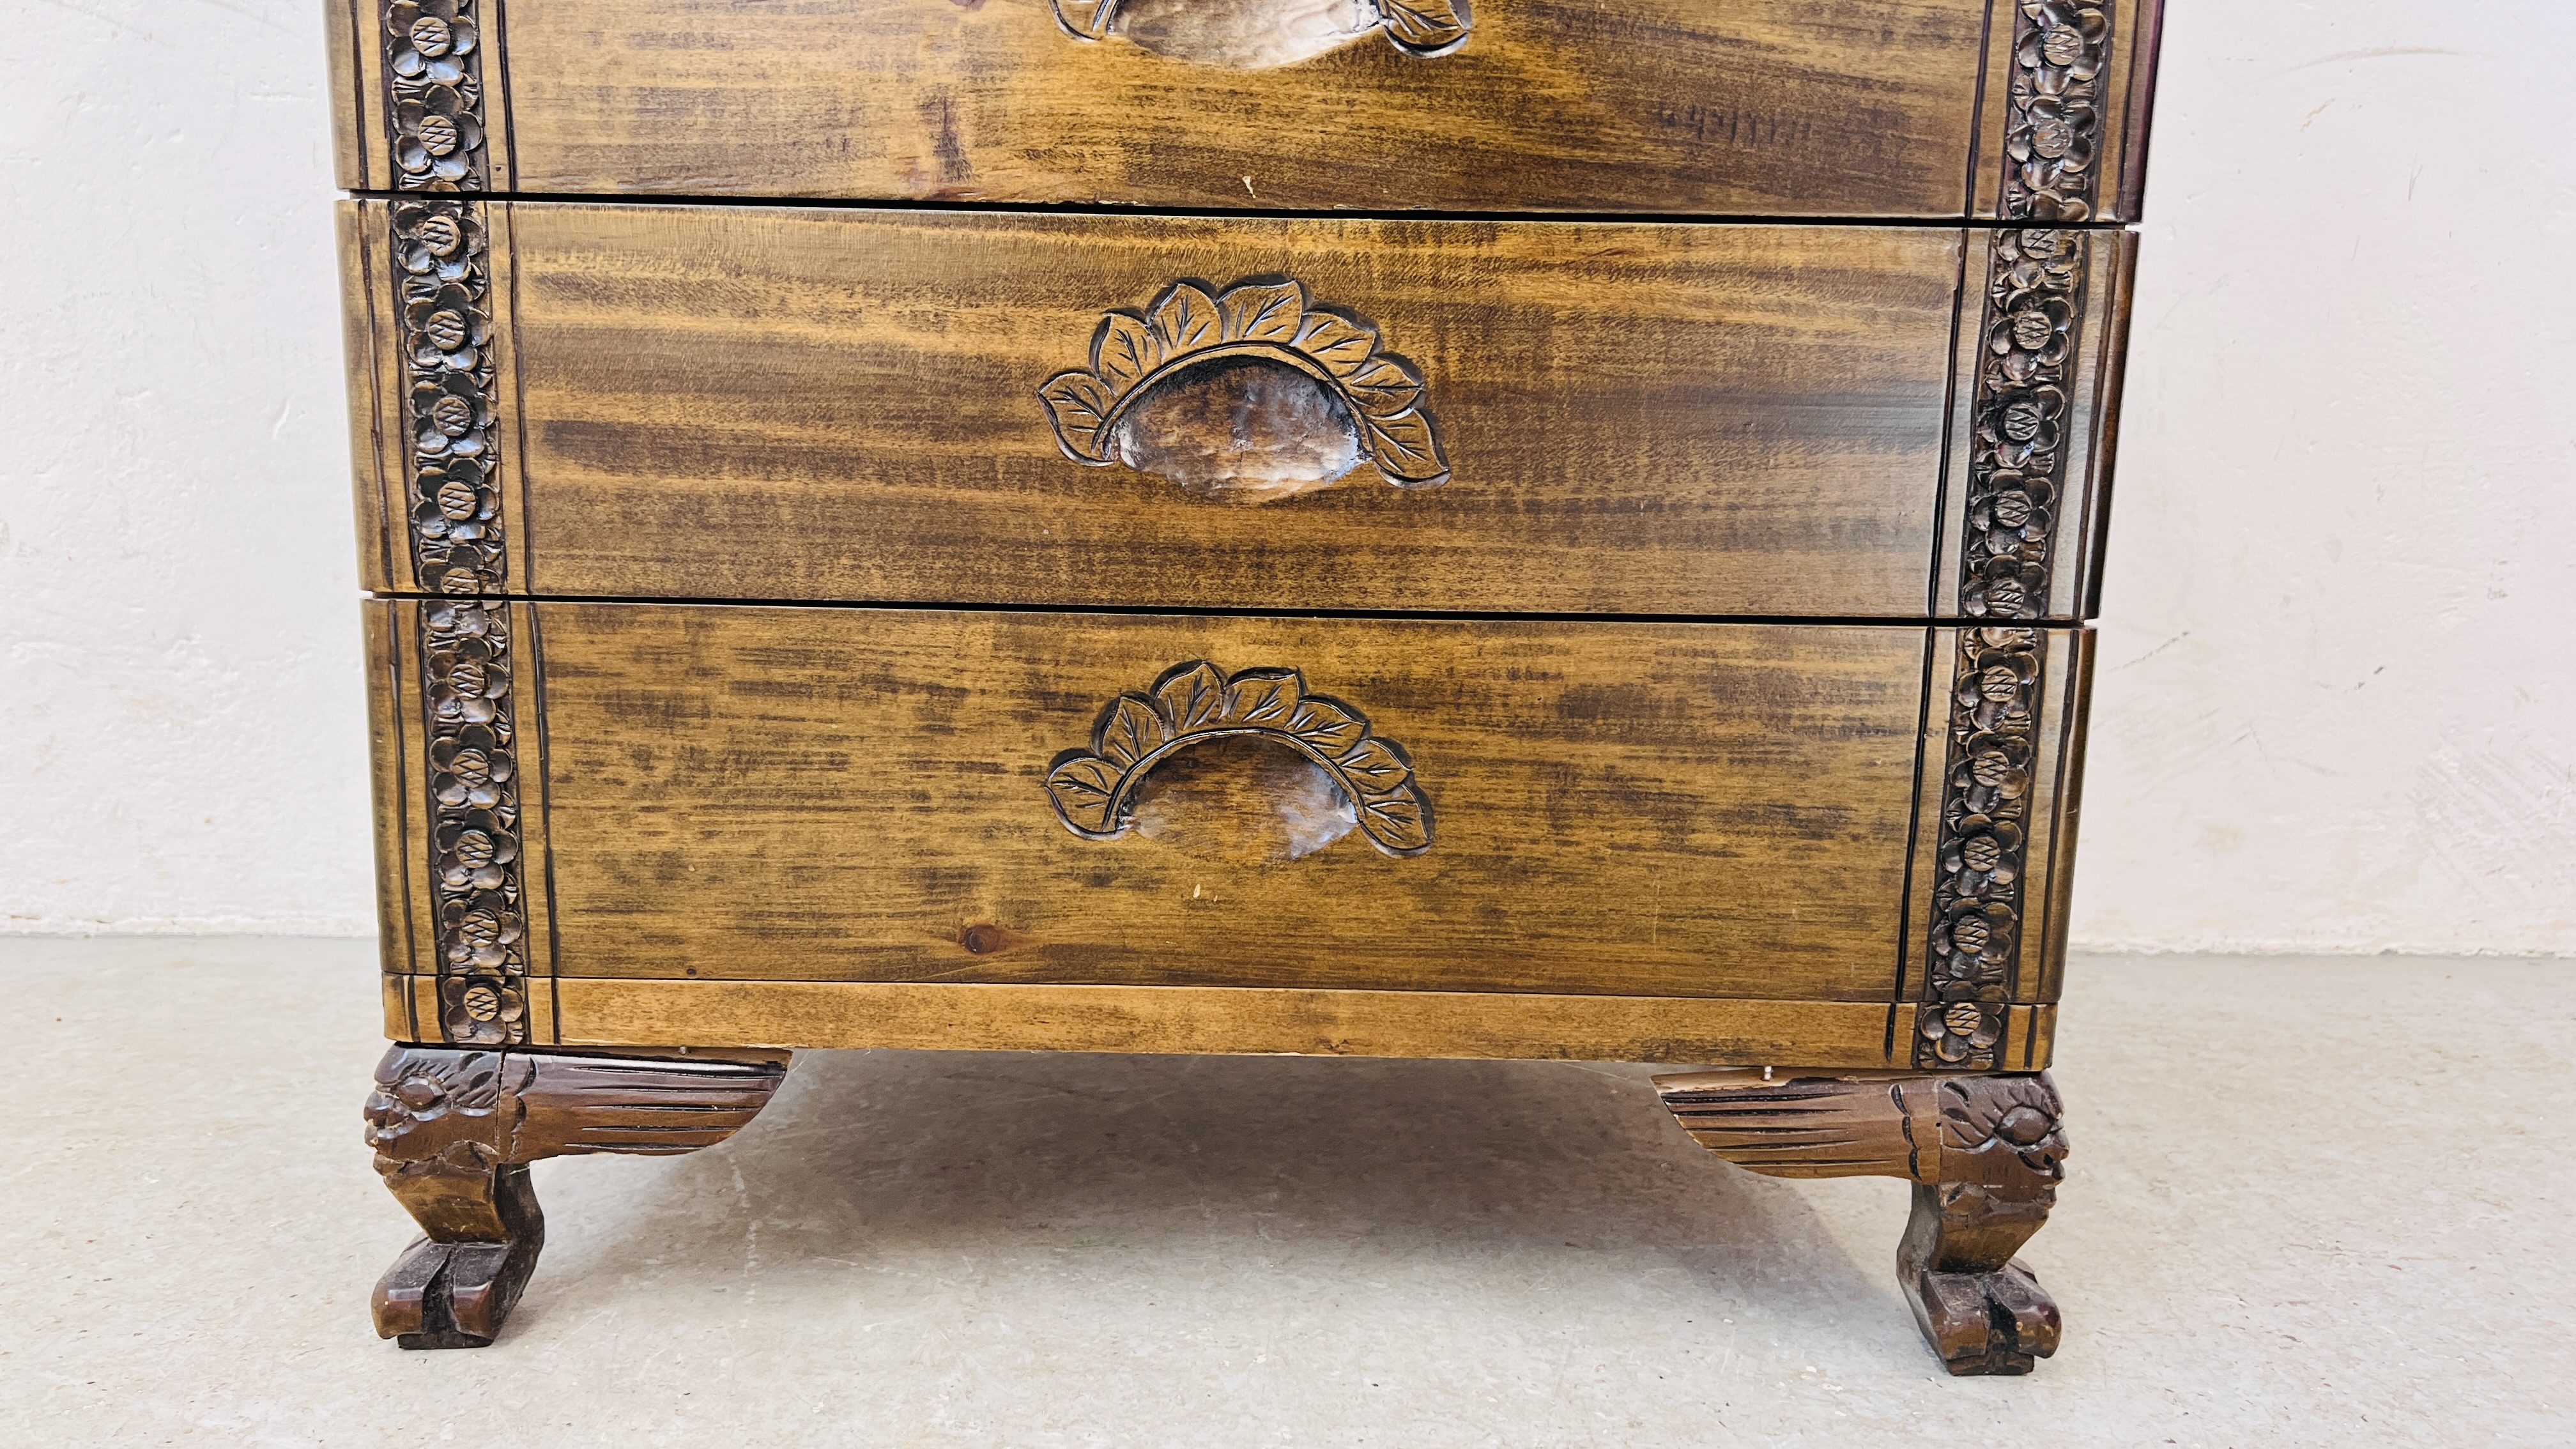 A 5 DRAWER HARDWOOD CHEST WITH A PAIR OF STALKS CARVED TO TOP AND FLORAL DECORATION CARVING - W - Image 4 of 11